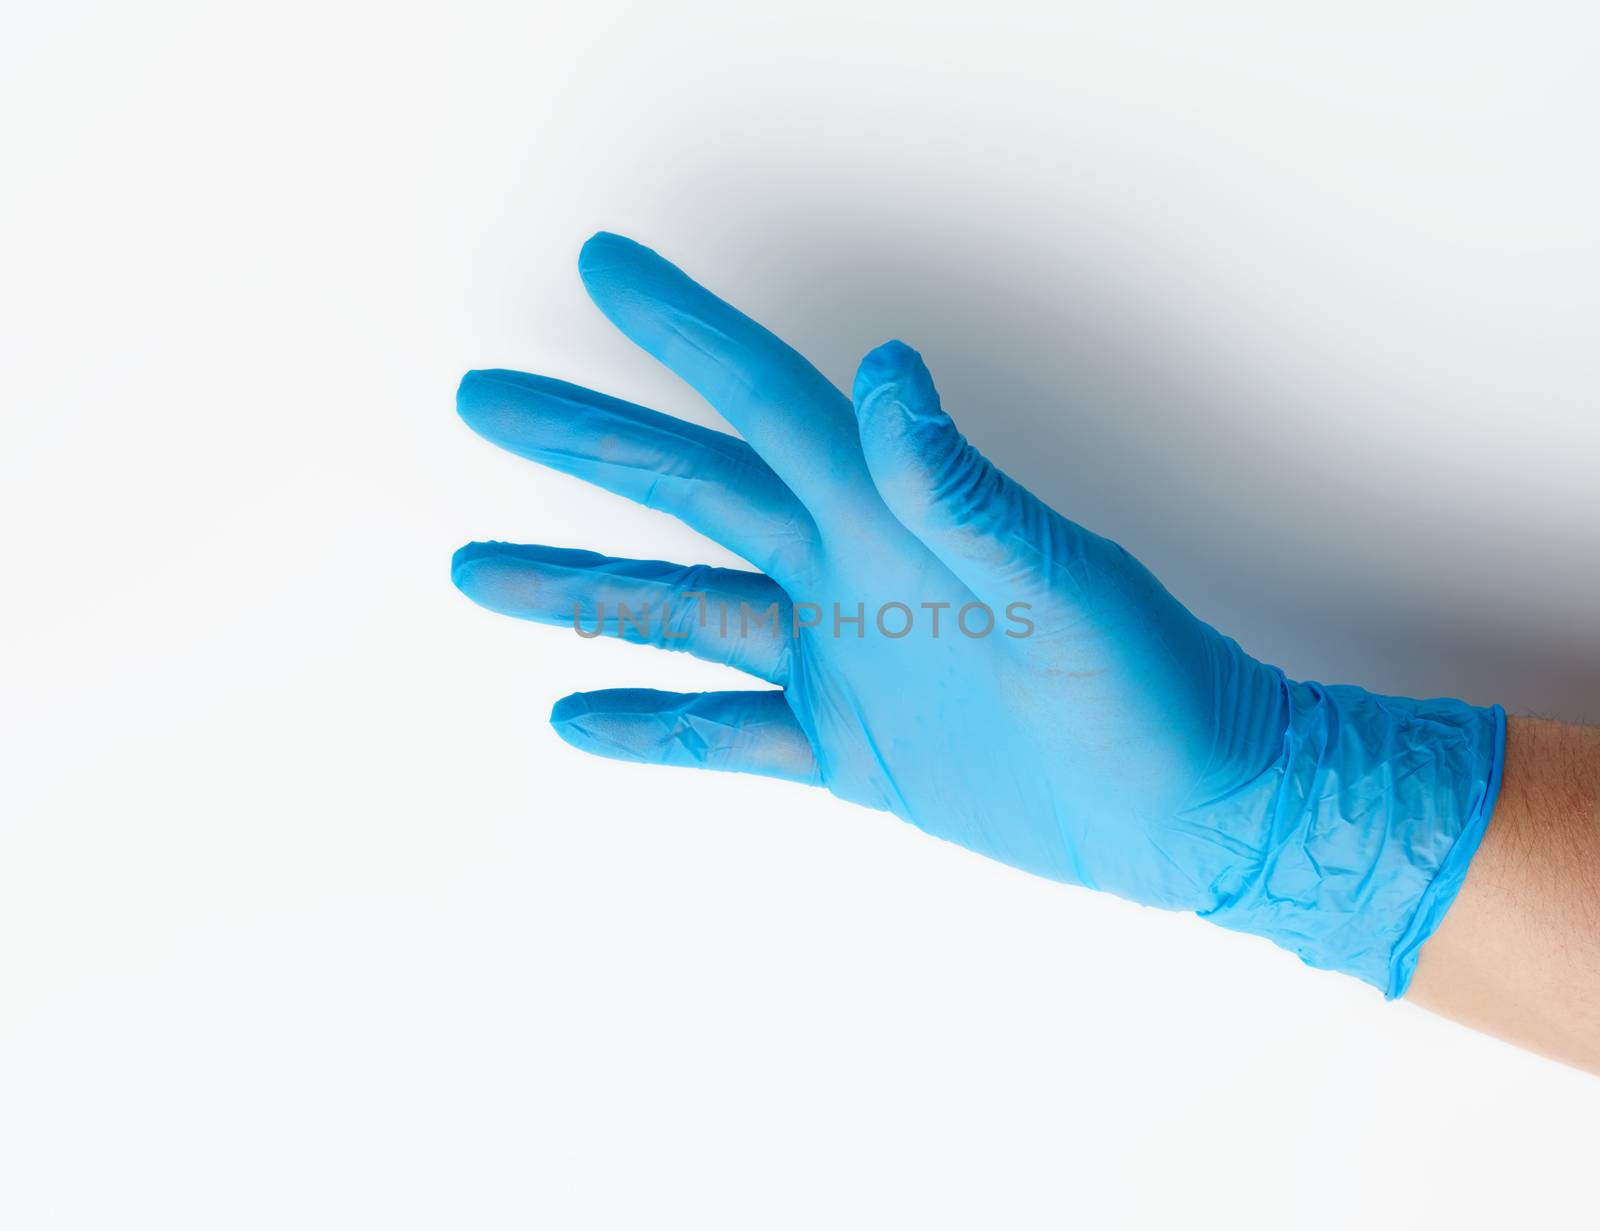 blue medical glove is worn on the arm, part of the body on a white background, close up